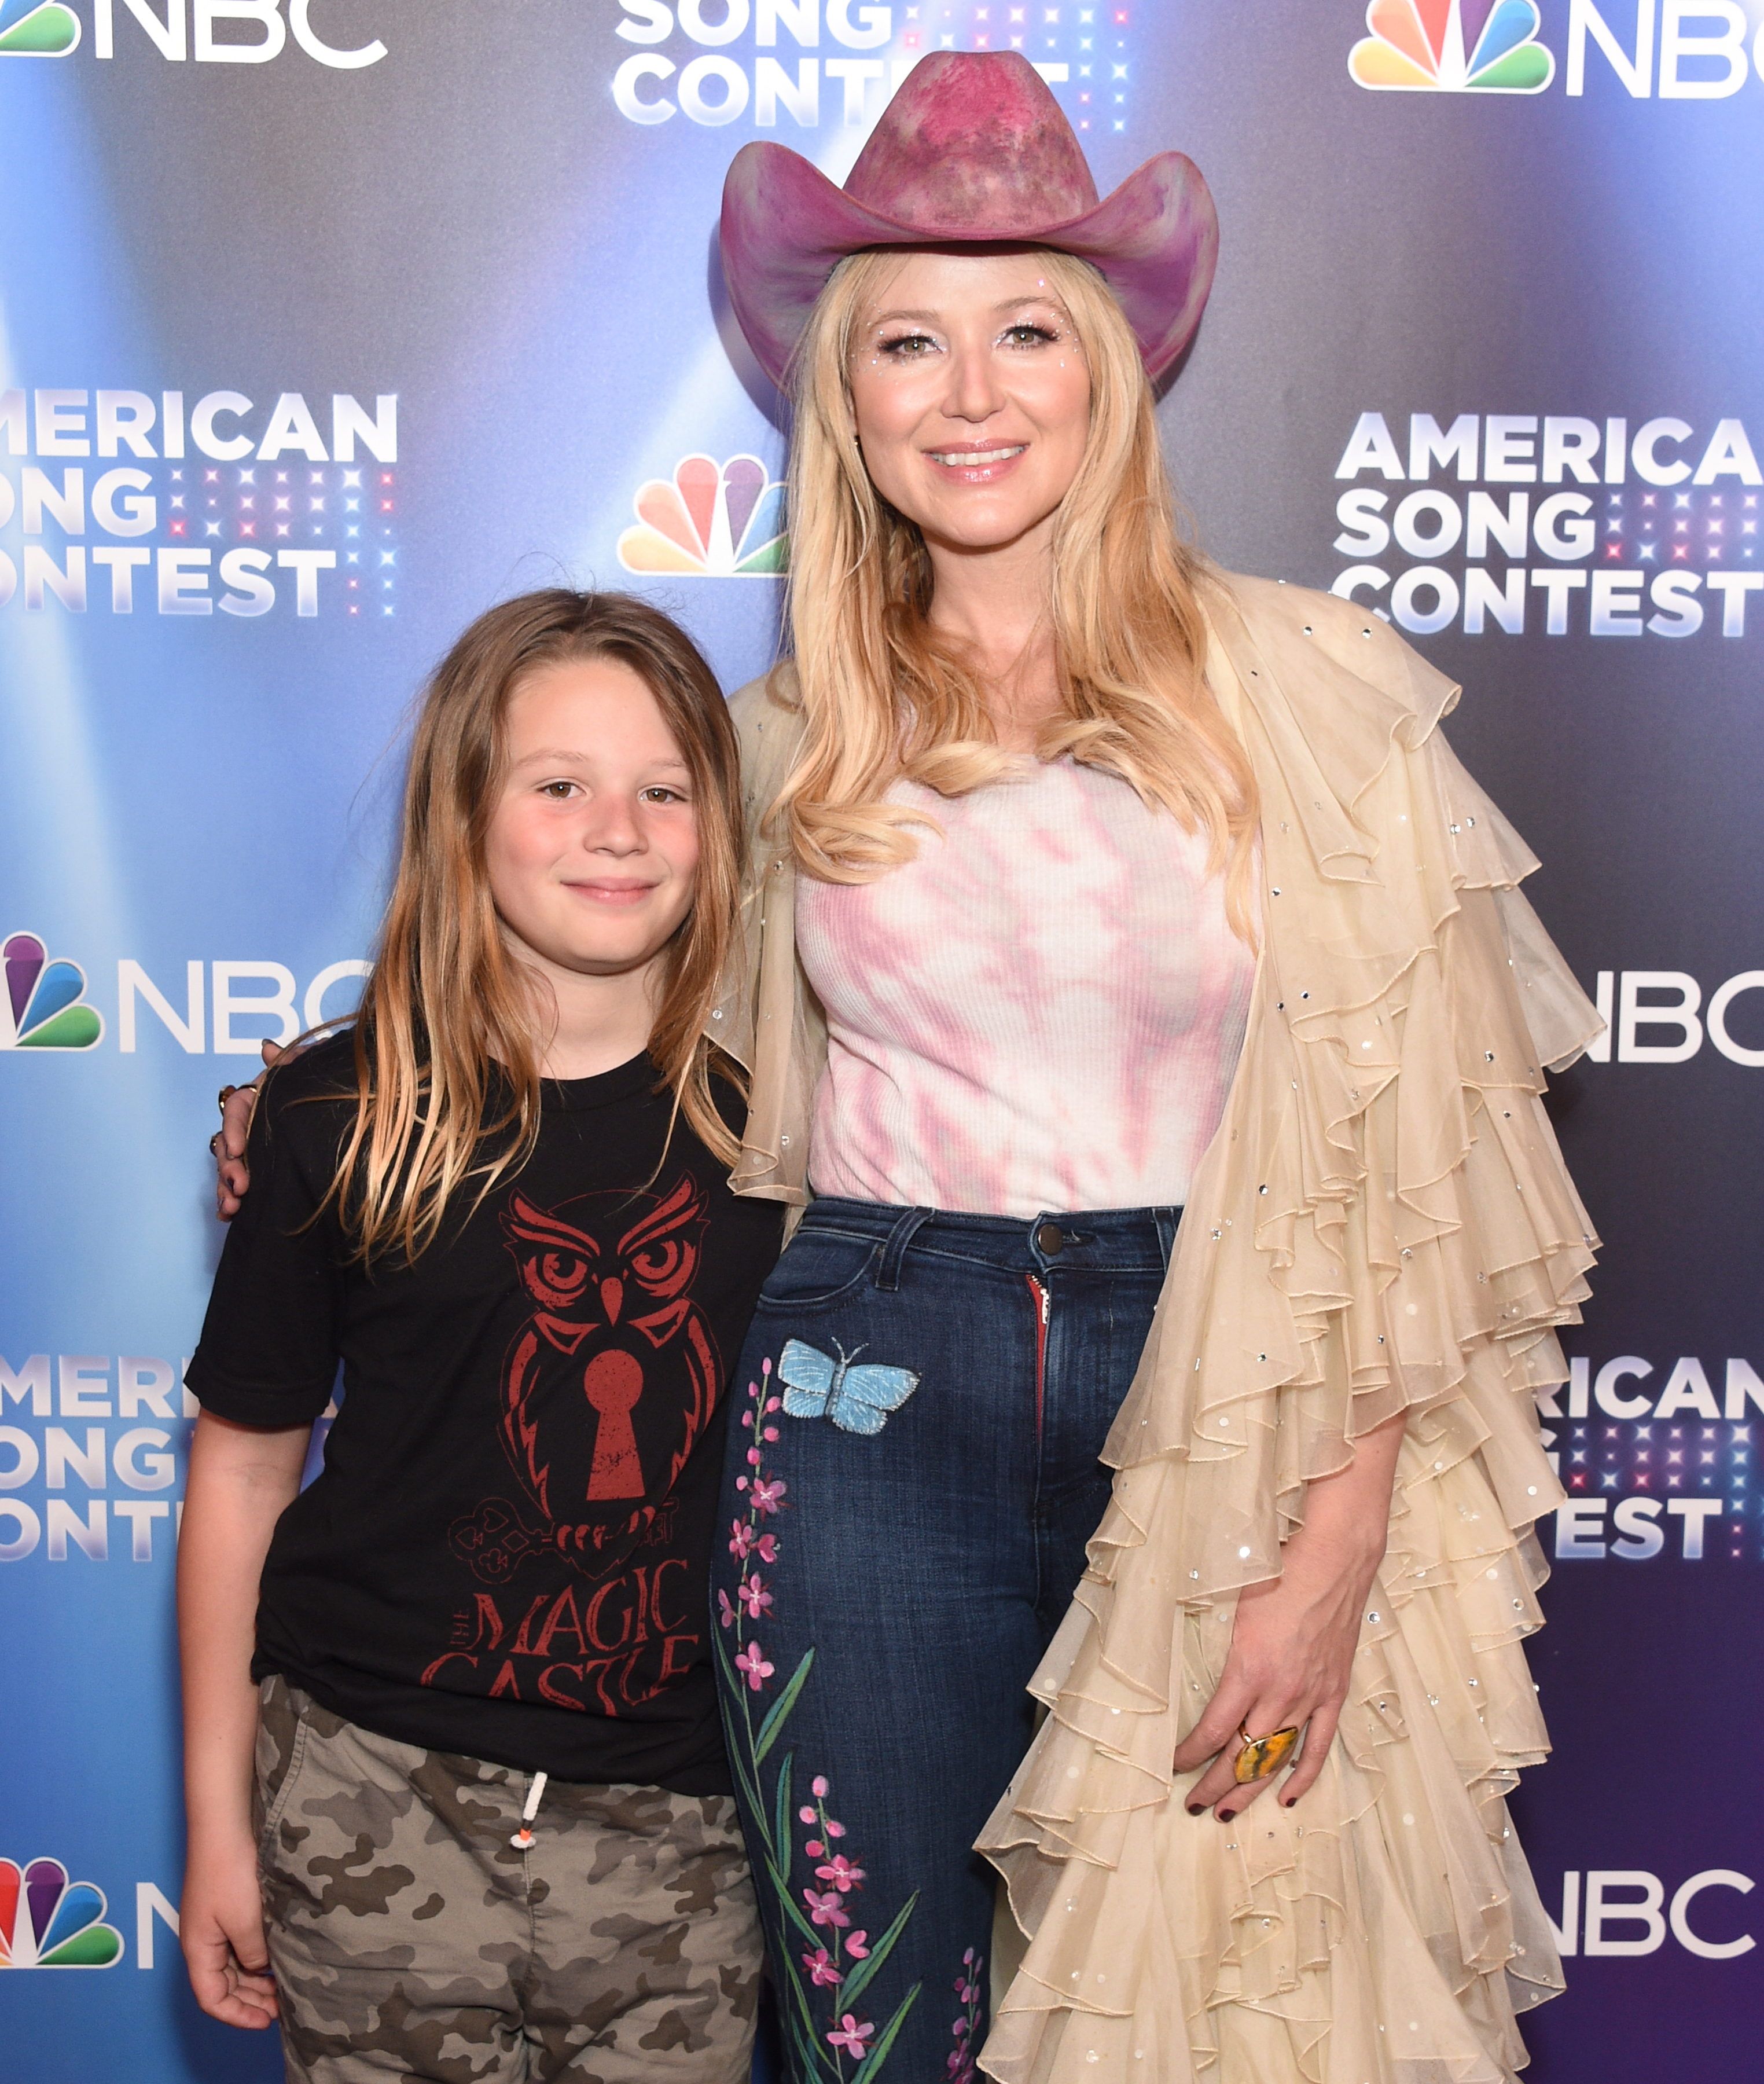 Kase Townes Murray and Jewel at NBC's "American Song Contest" Week 3 red carpet at Universal Studios Hollywood on April 4, 2022, in Universal City, California | Source: Getty Images